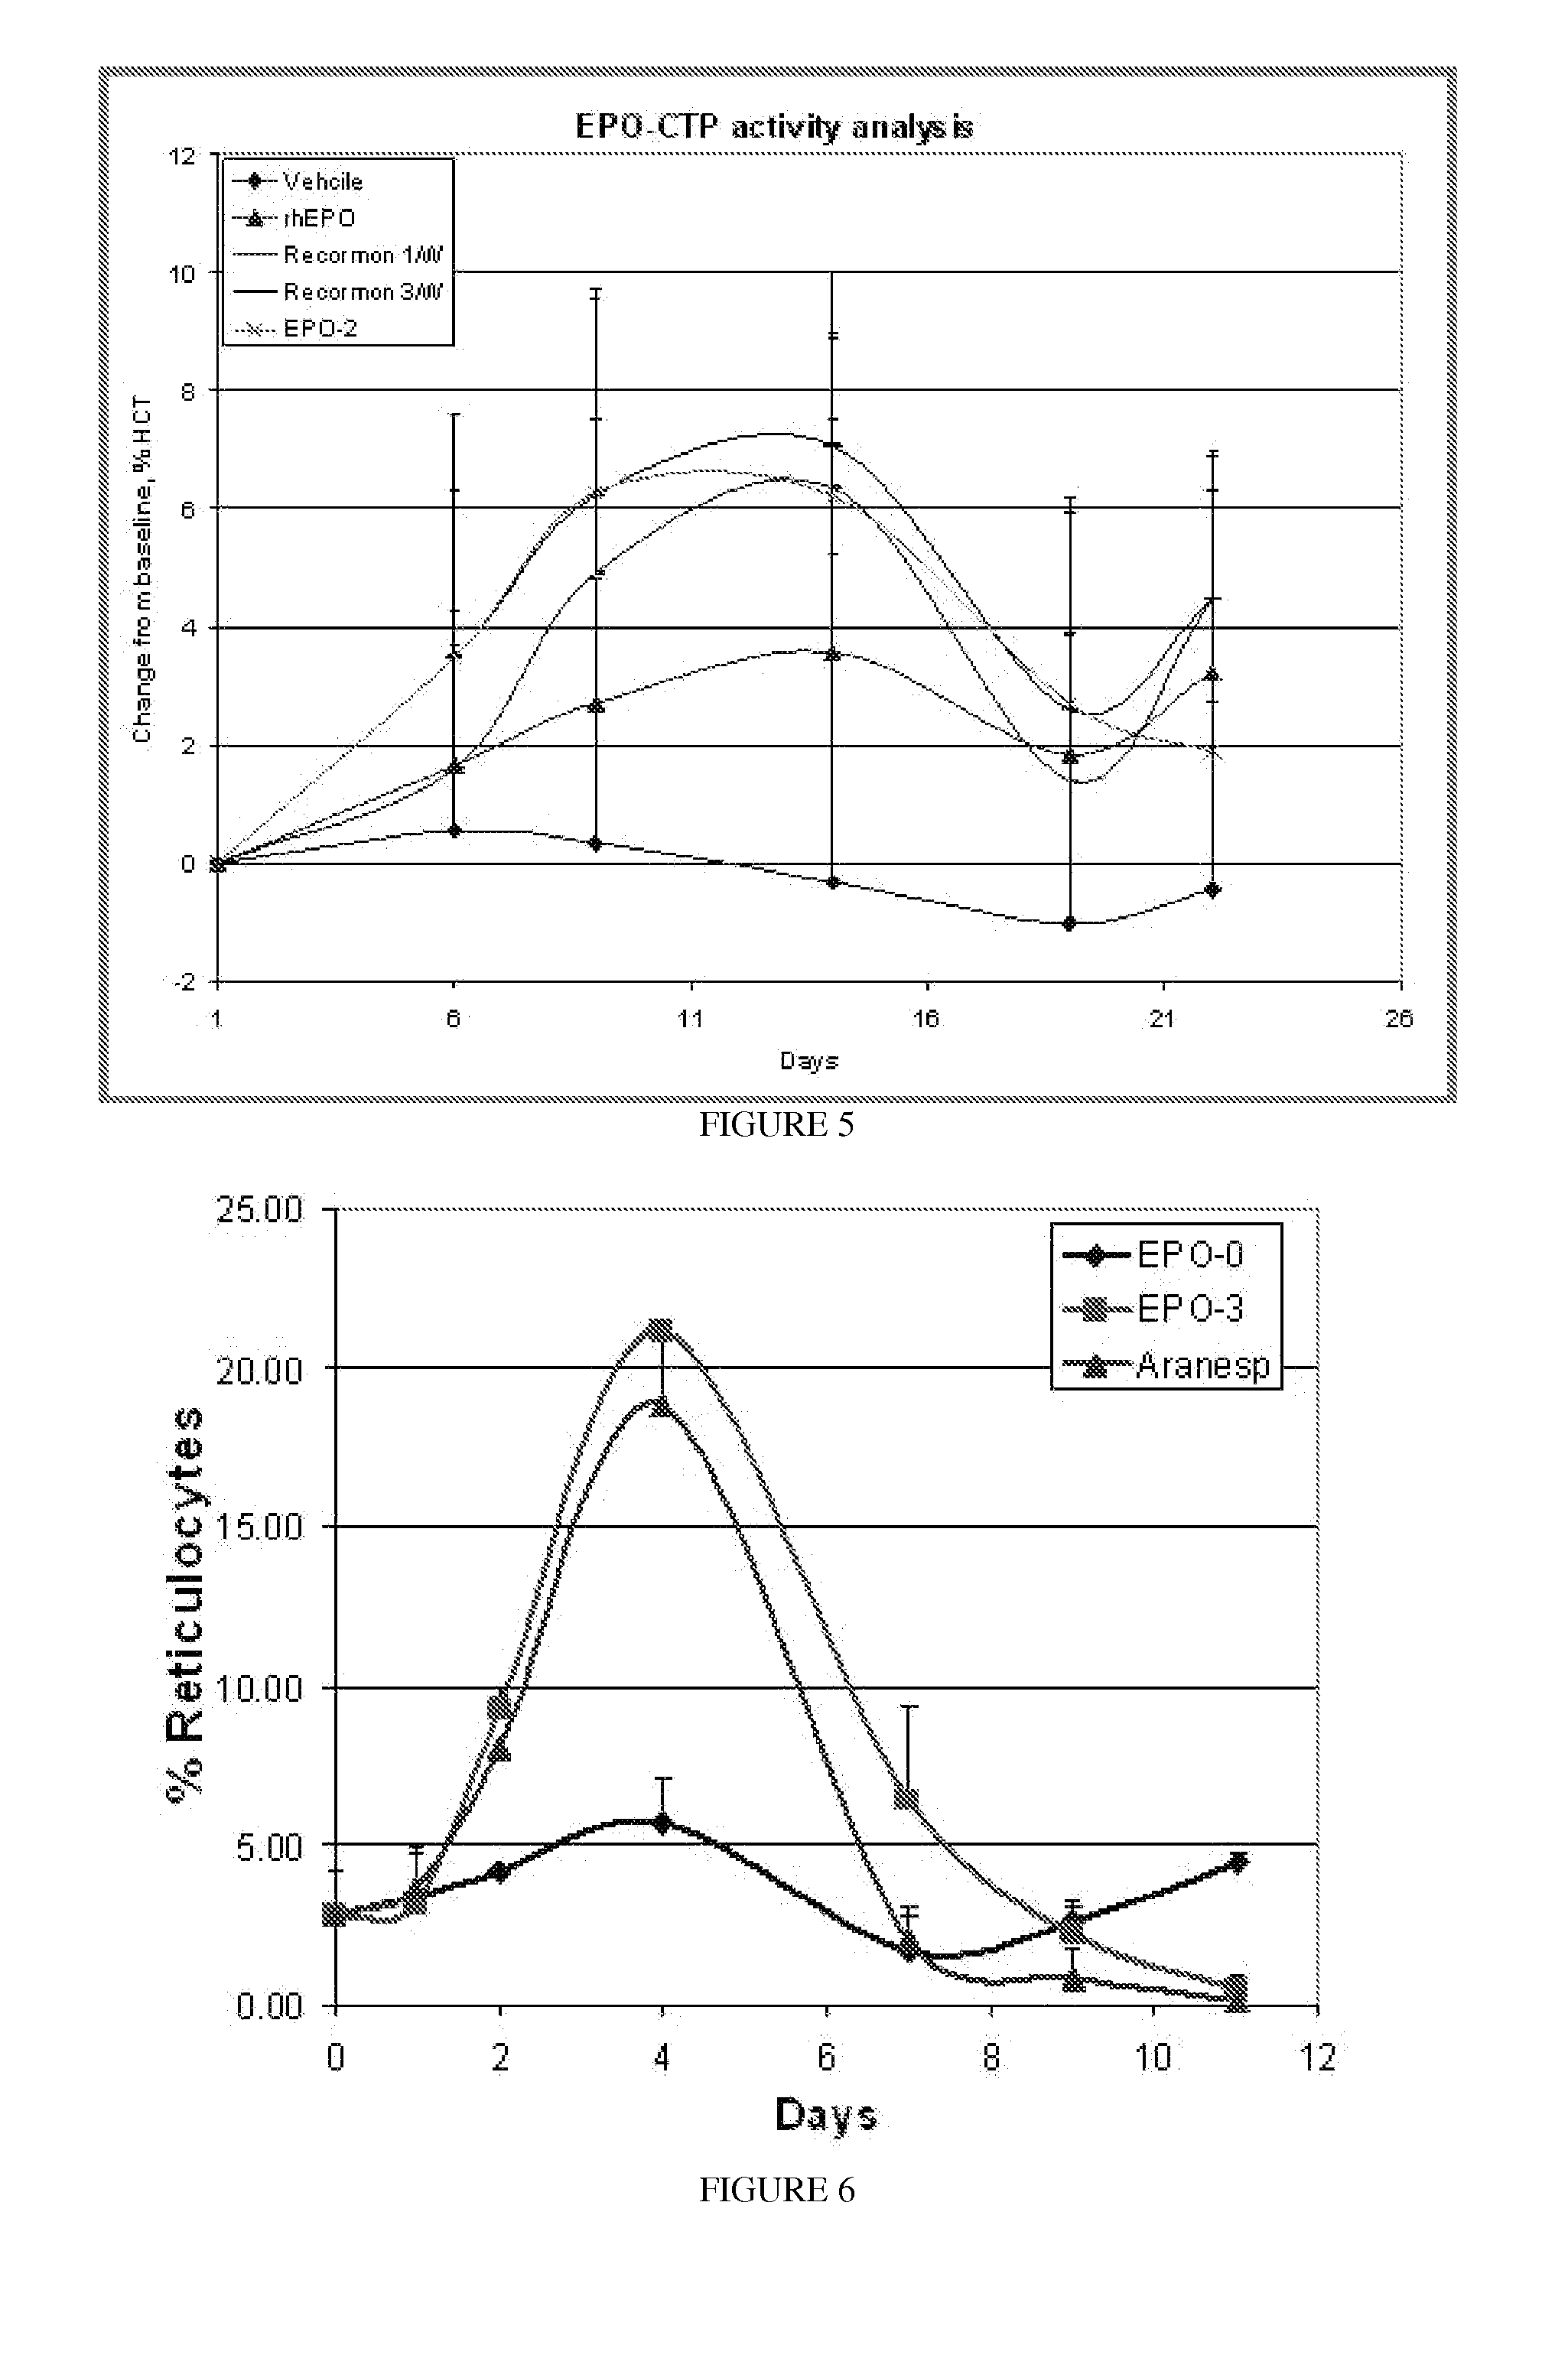 Long-acting polypeptides and methods of producing and administering same